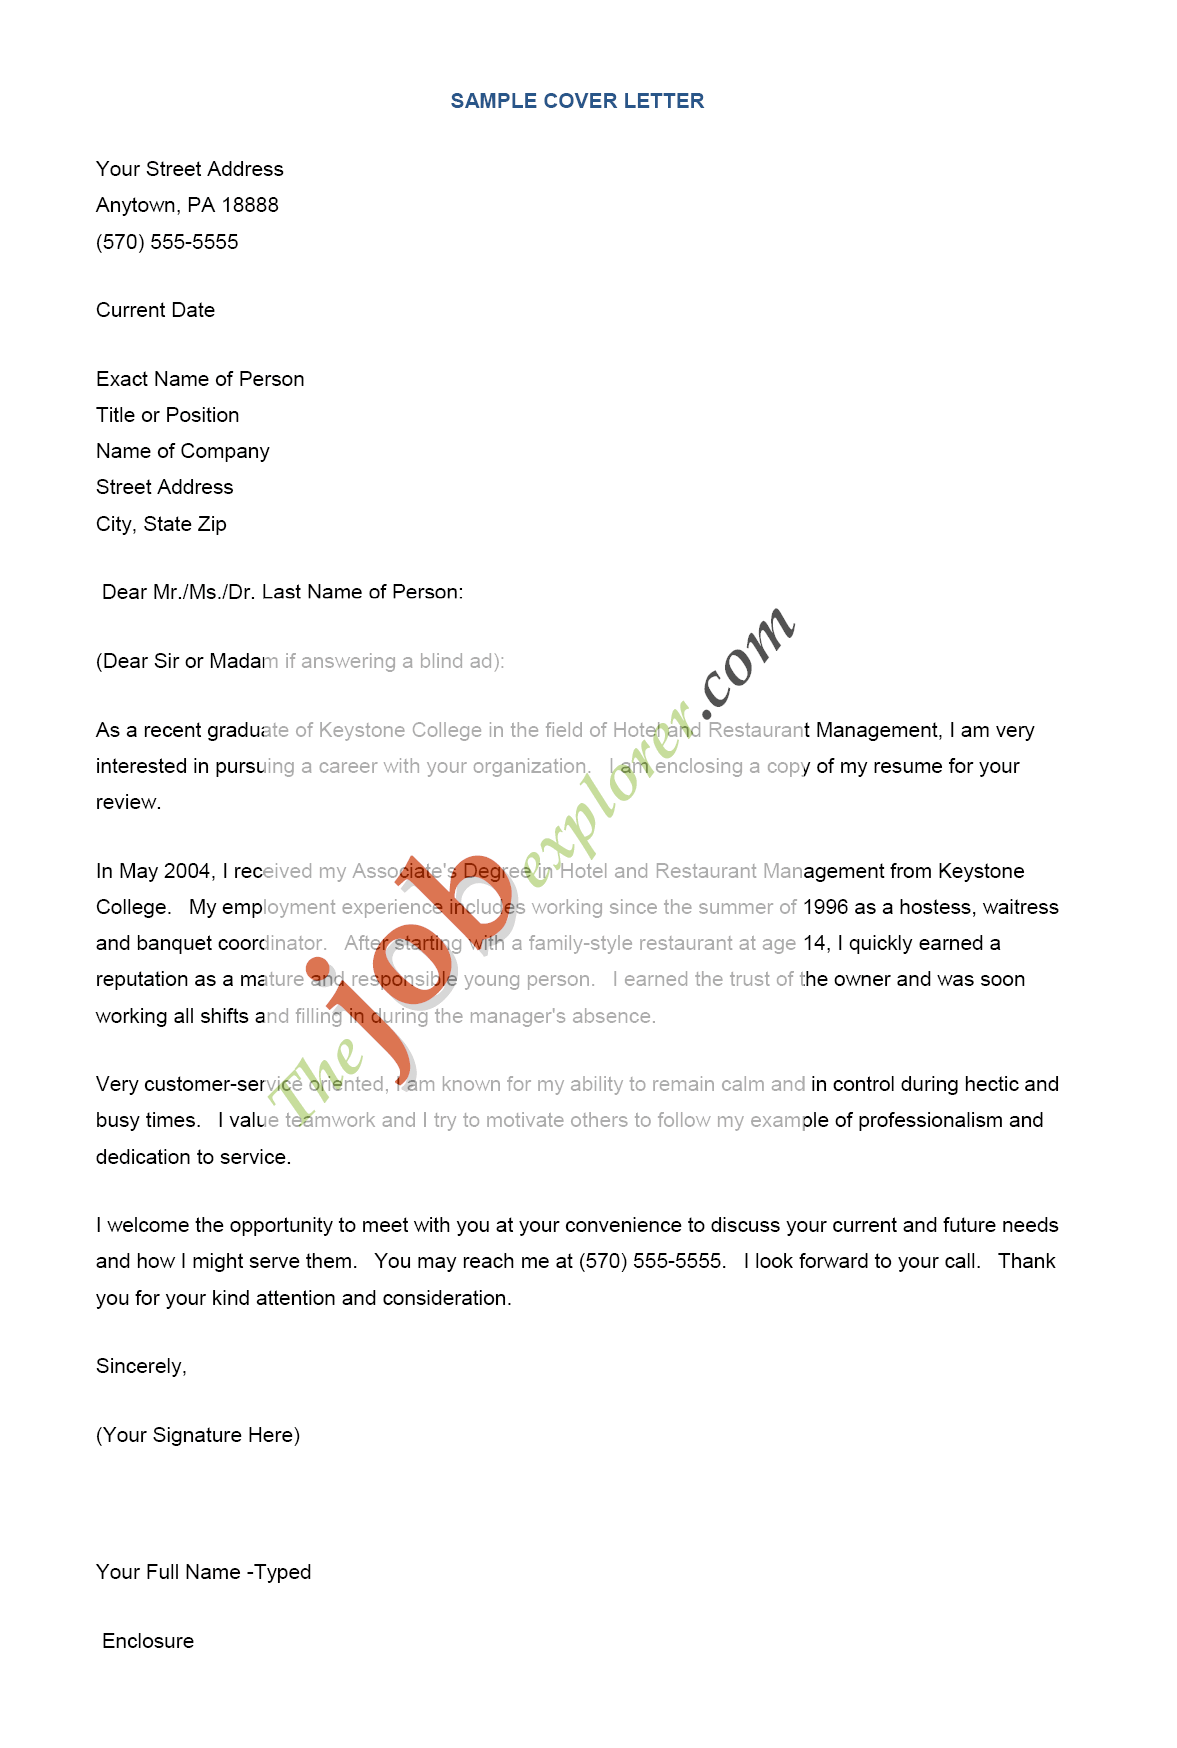 Cover Letter Template Examples from www.thejobexplorer.com